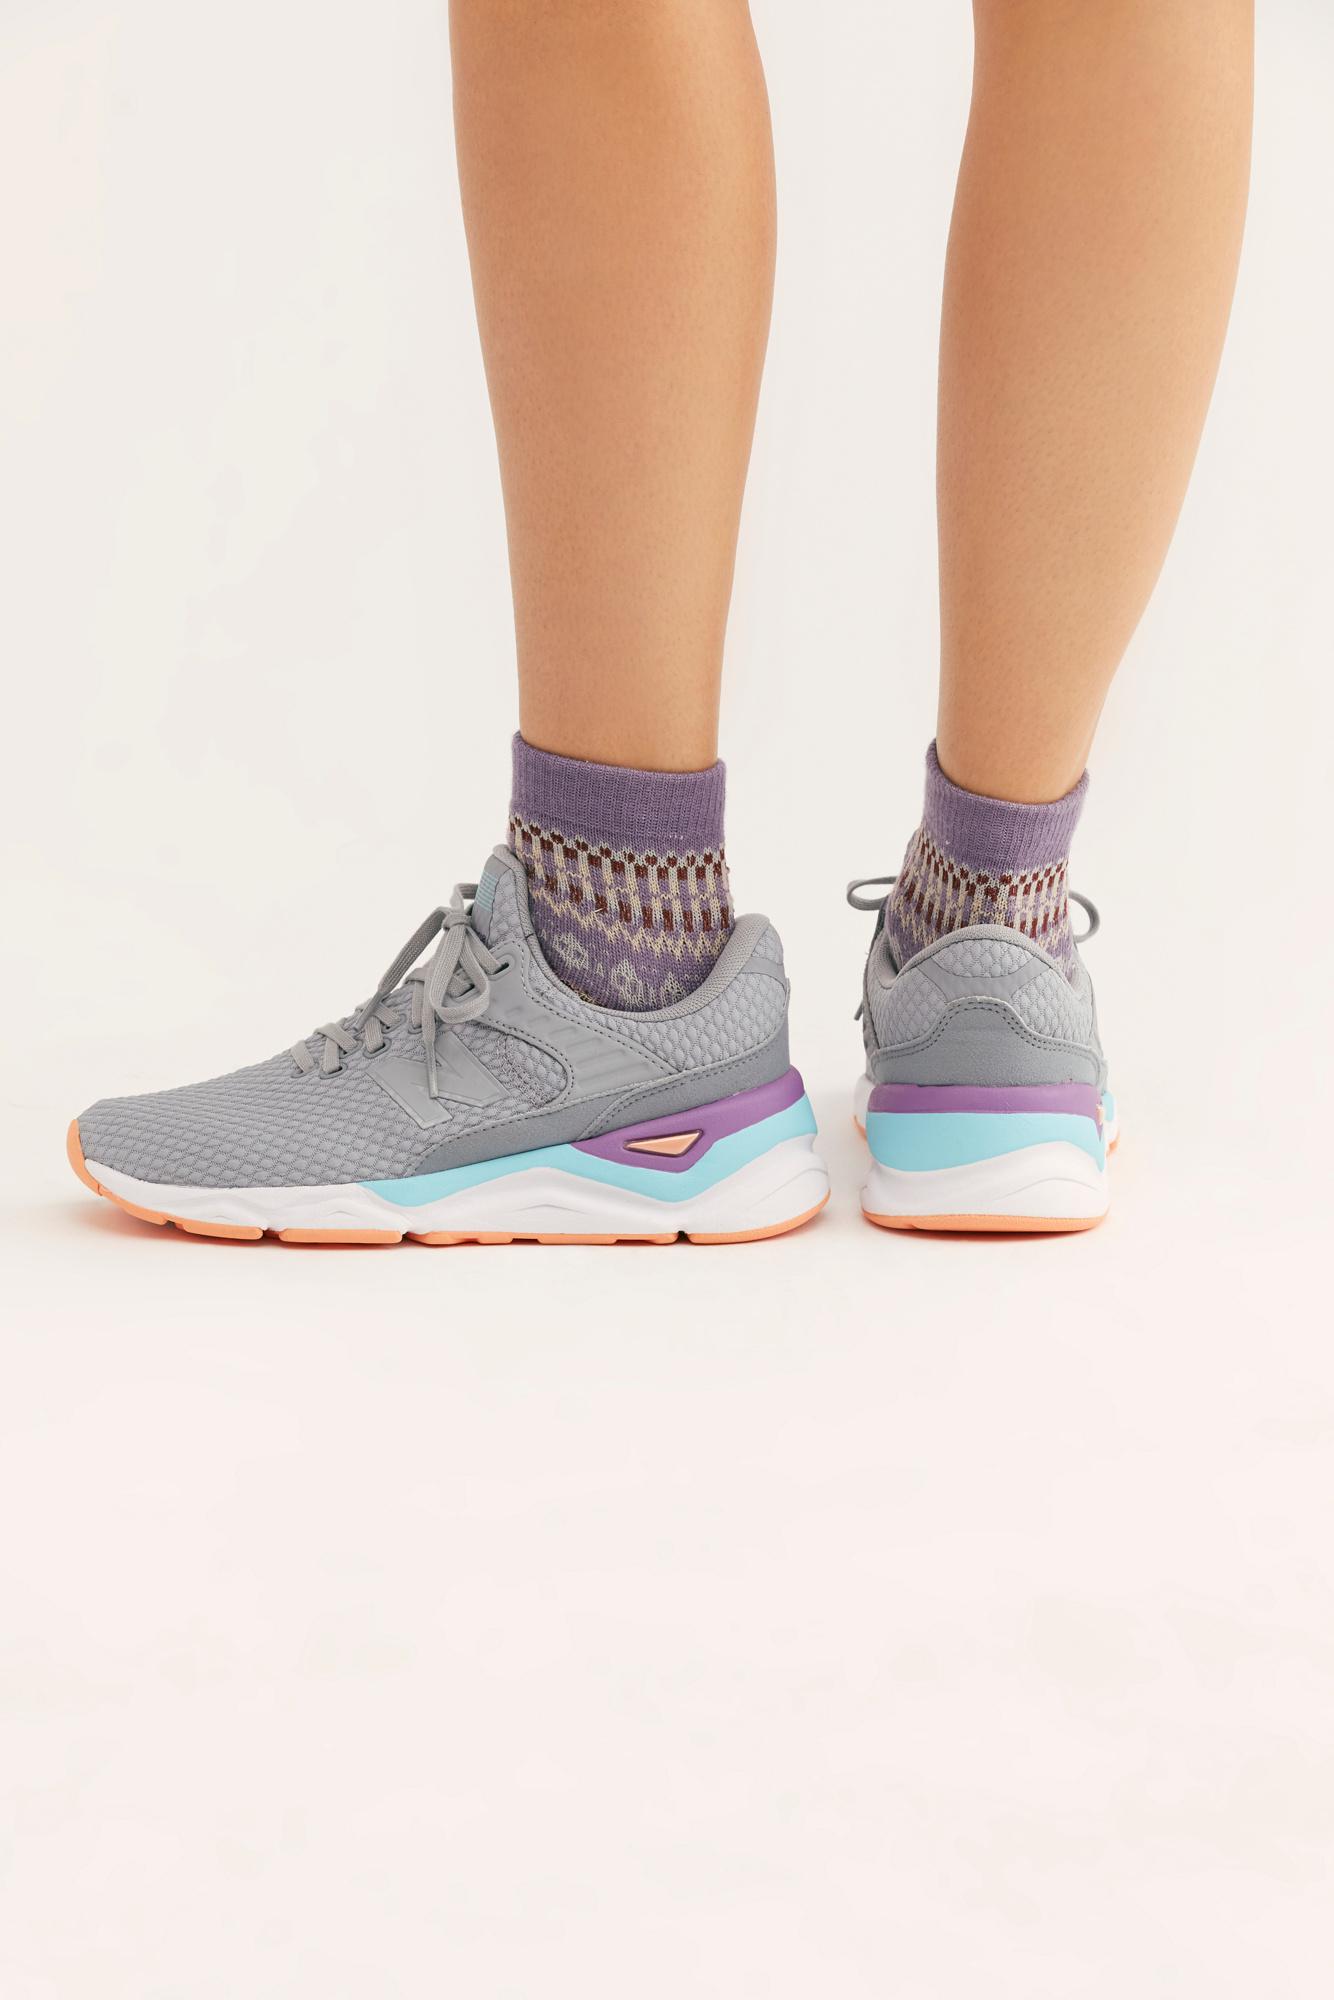 Free People Rubber X90 Textile Trainer 